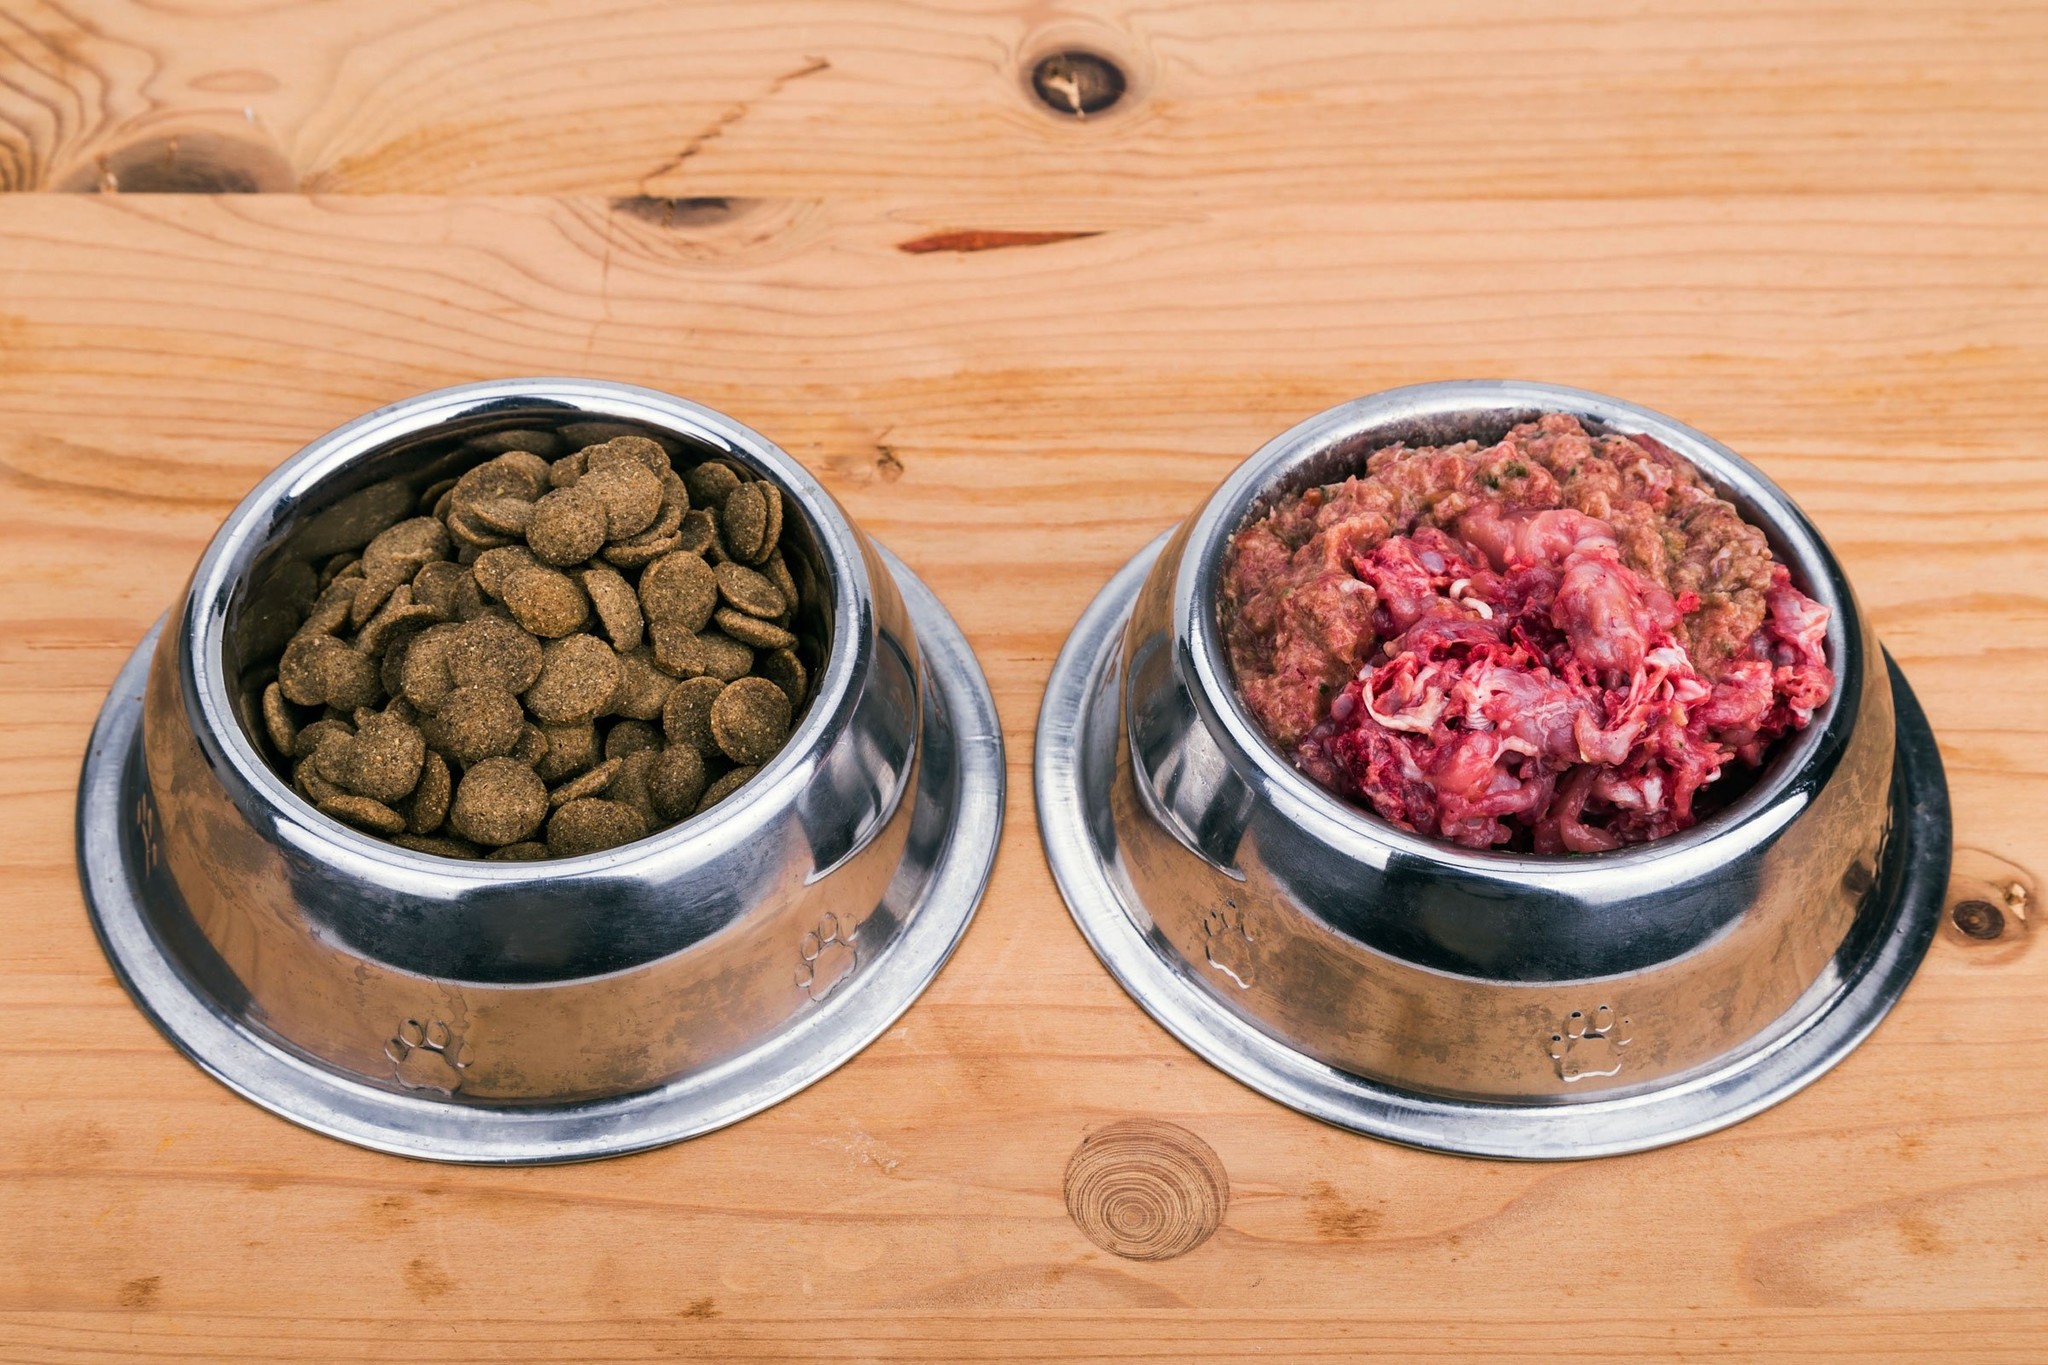 Why should you raw feed dogs and cats